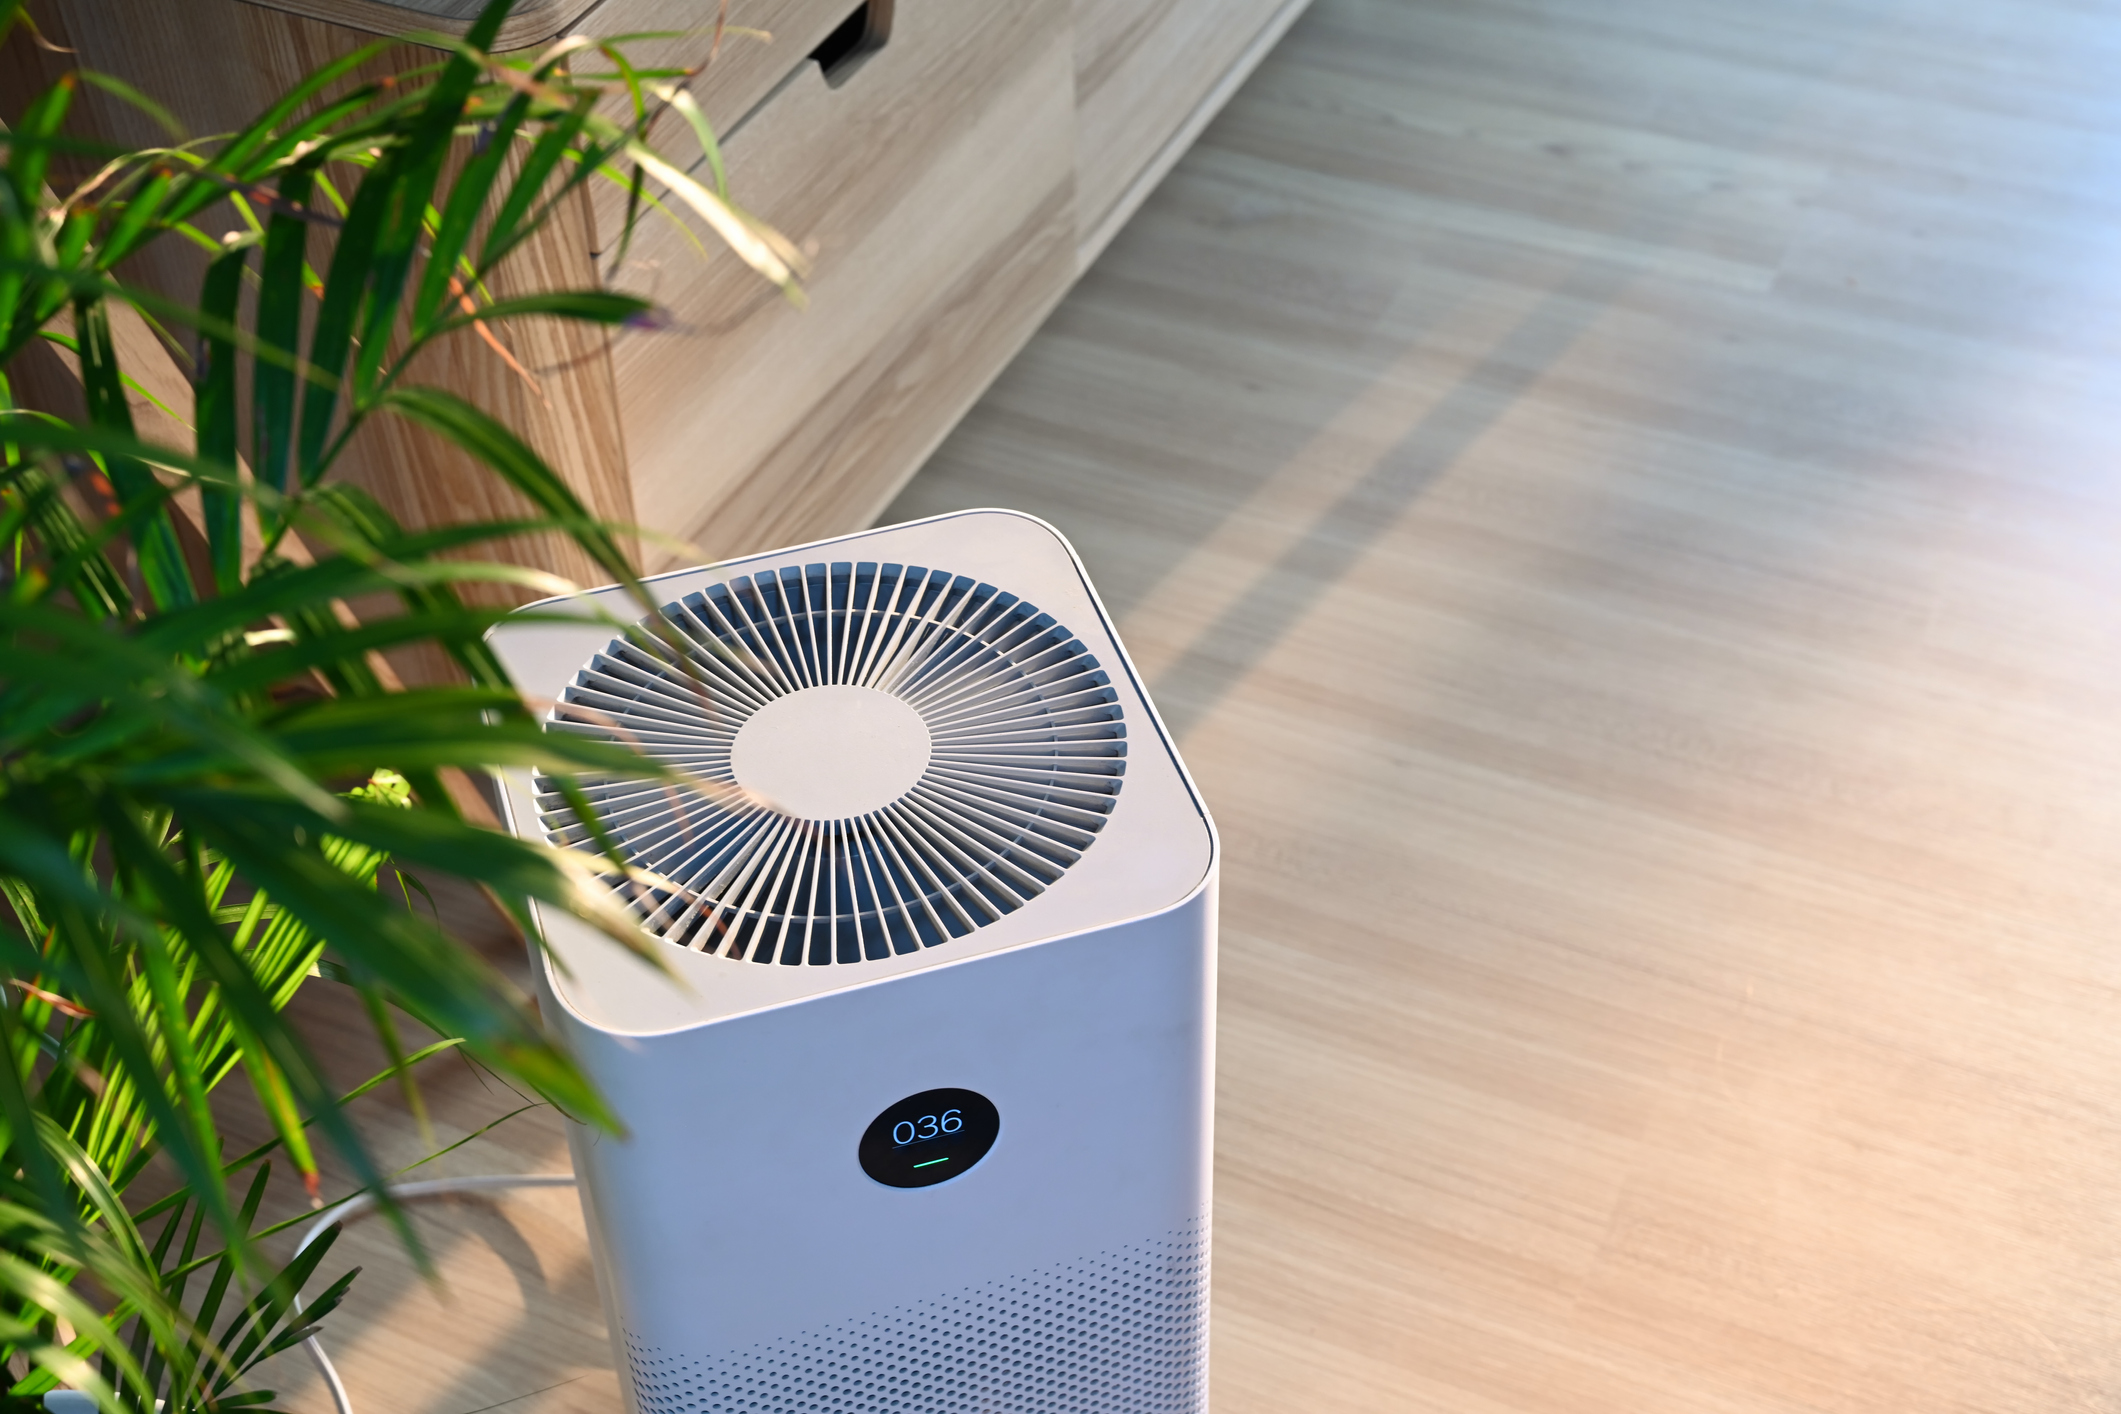 Air purifier in a living room under a plant